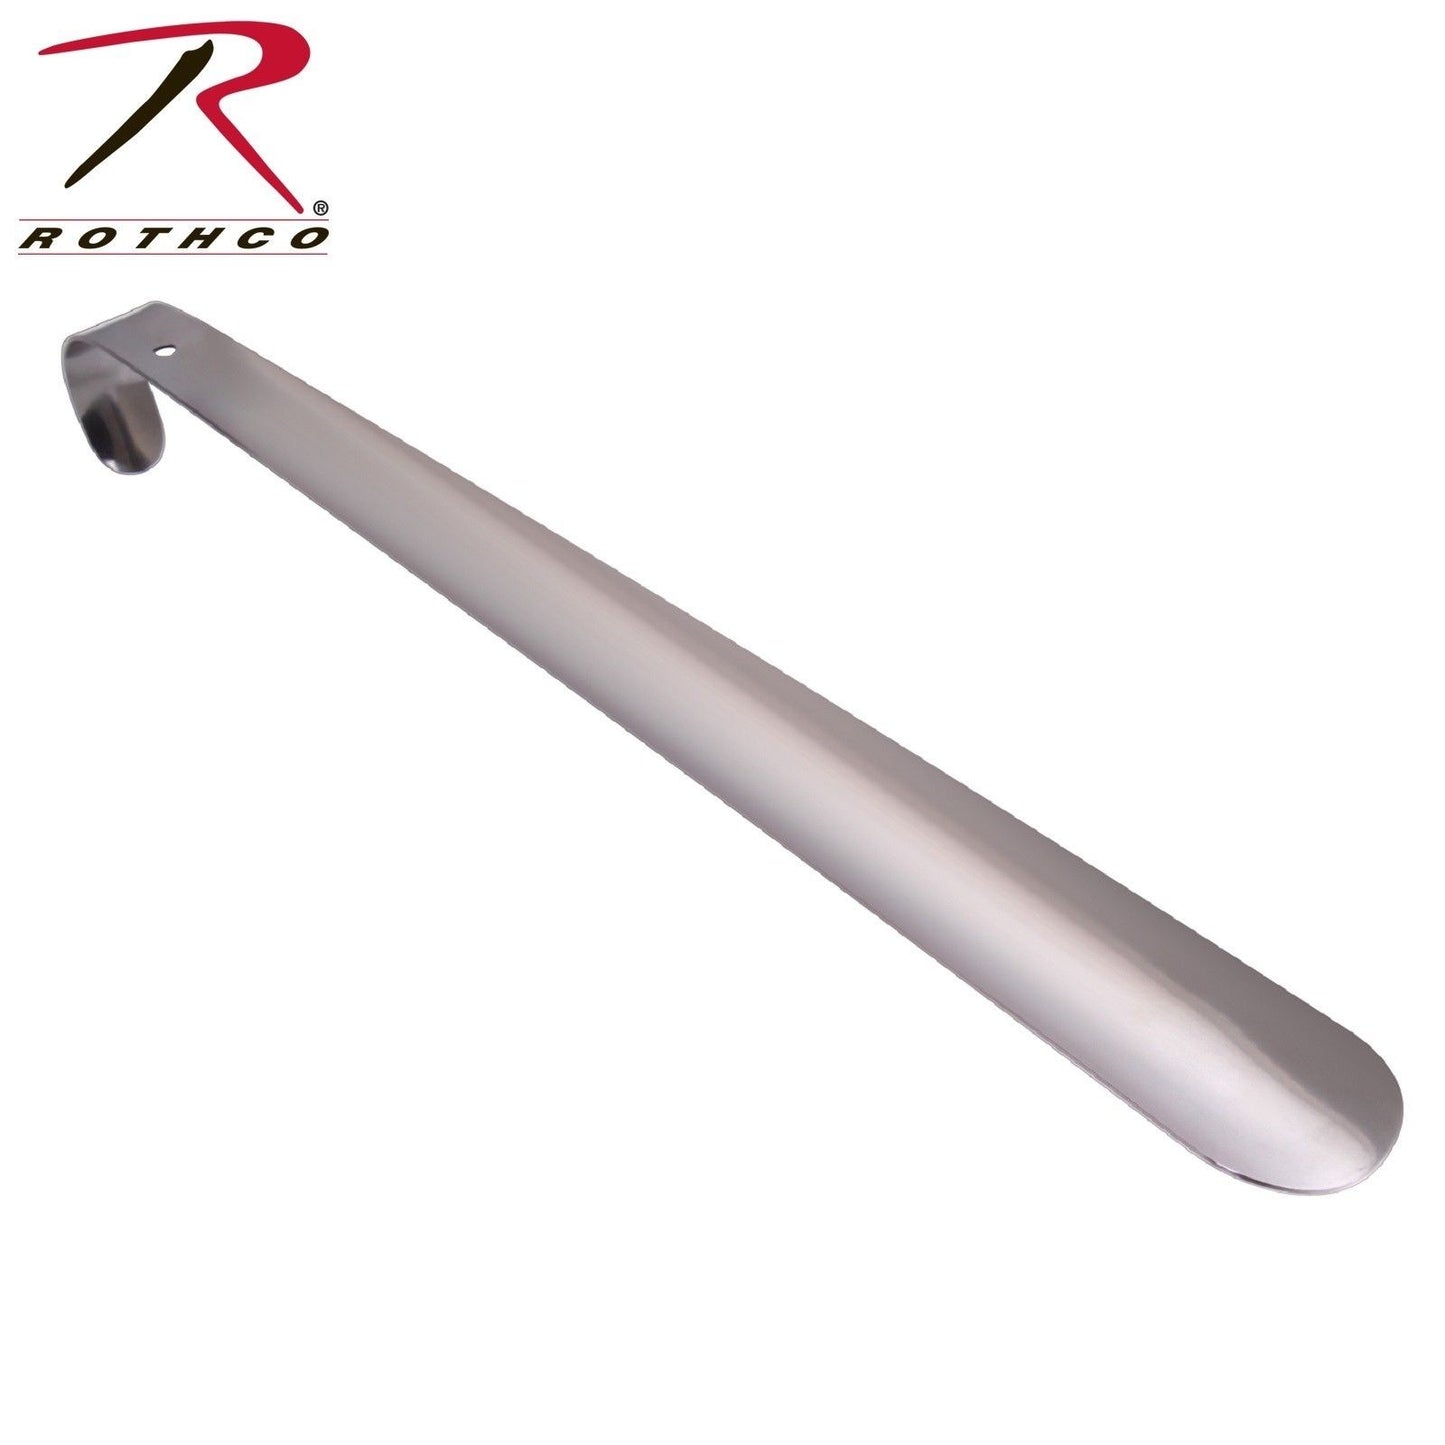 Rothco Stainless Steel Shoe Horn - 16.5" Length Metal Shoehorn For Boots